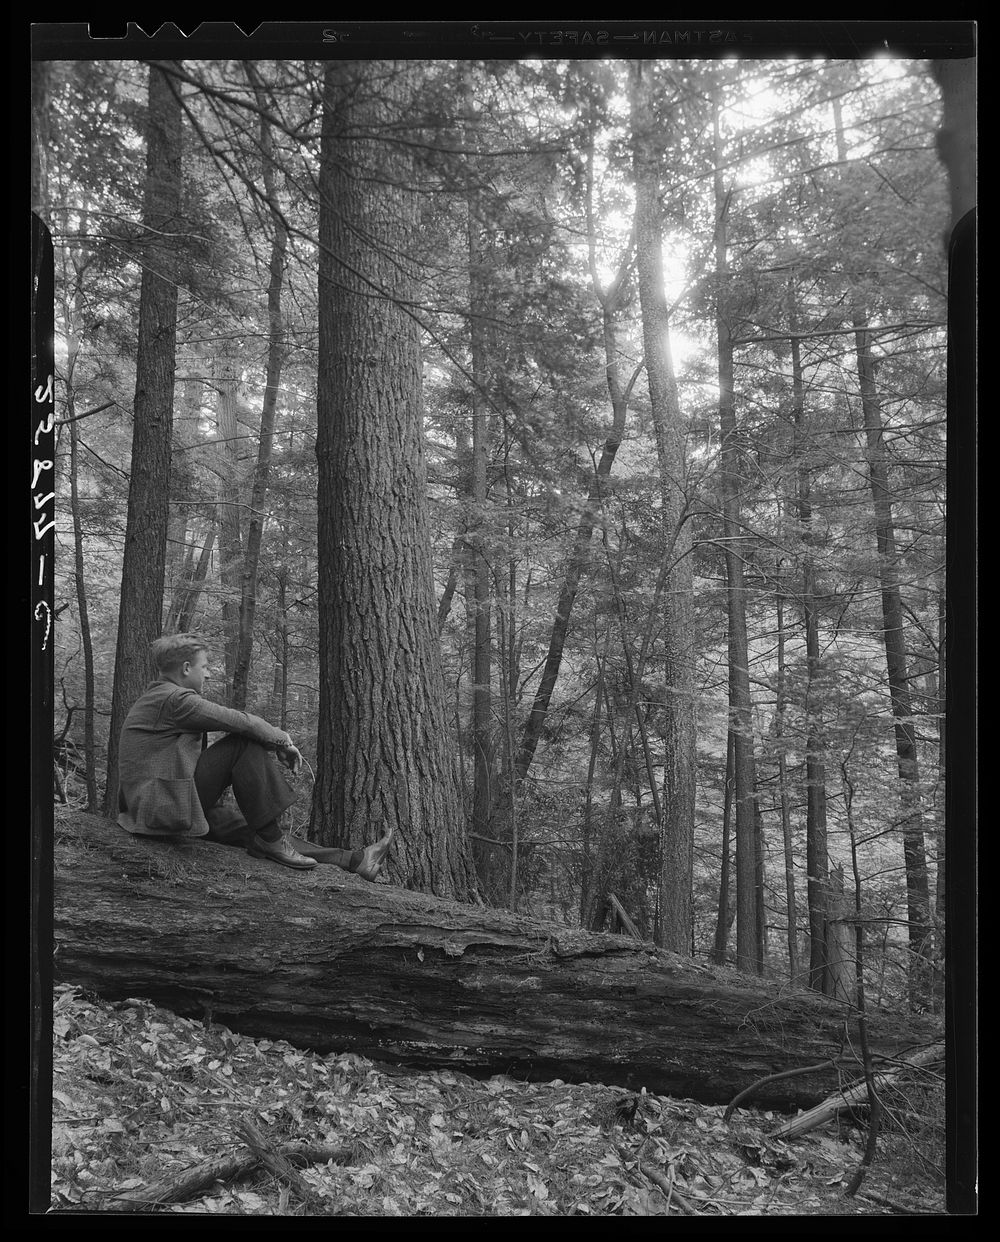 Large trees in Otsego County, New York. Sourced from the Library of Congress.